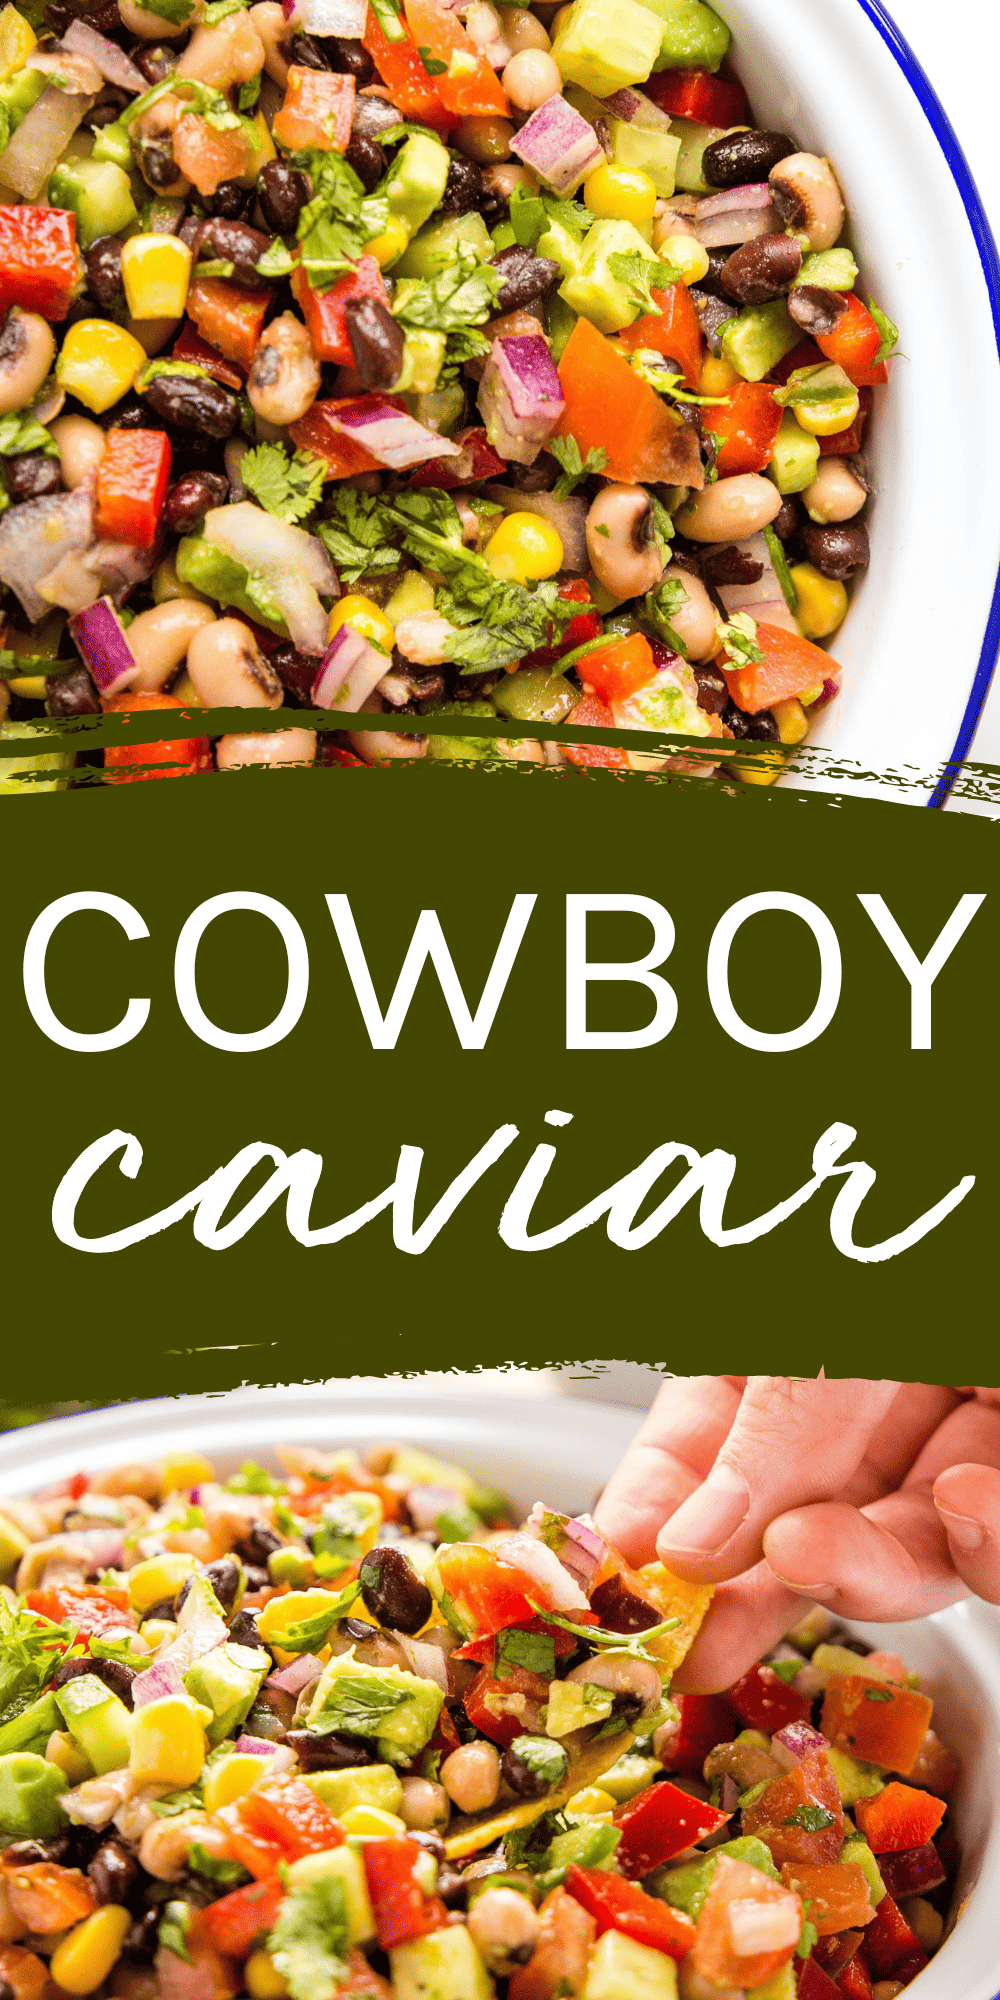 This Cowboy Caviar recipe is a fresh homemade salsa that's quick and easy to make. It's packed with black bean, corn and avocado and it's a delicious addition to your favourite Mexican meals, served as a dip with tortilla chips or as a topping for grilled meats, fish or salads. Recipe from thebusybaker.ca! #cowboycaviar #cowboycaviarrecipe #cowboycaviardip #blackbeansalsa #homemadesalsa #texascaviar #texascaviarrecipe #texmex #mexican #easyrecipe #diprecipe #summerrecipe #snack #appetizer via @busybakerblog